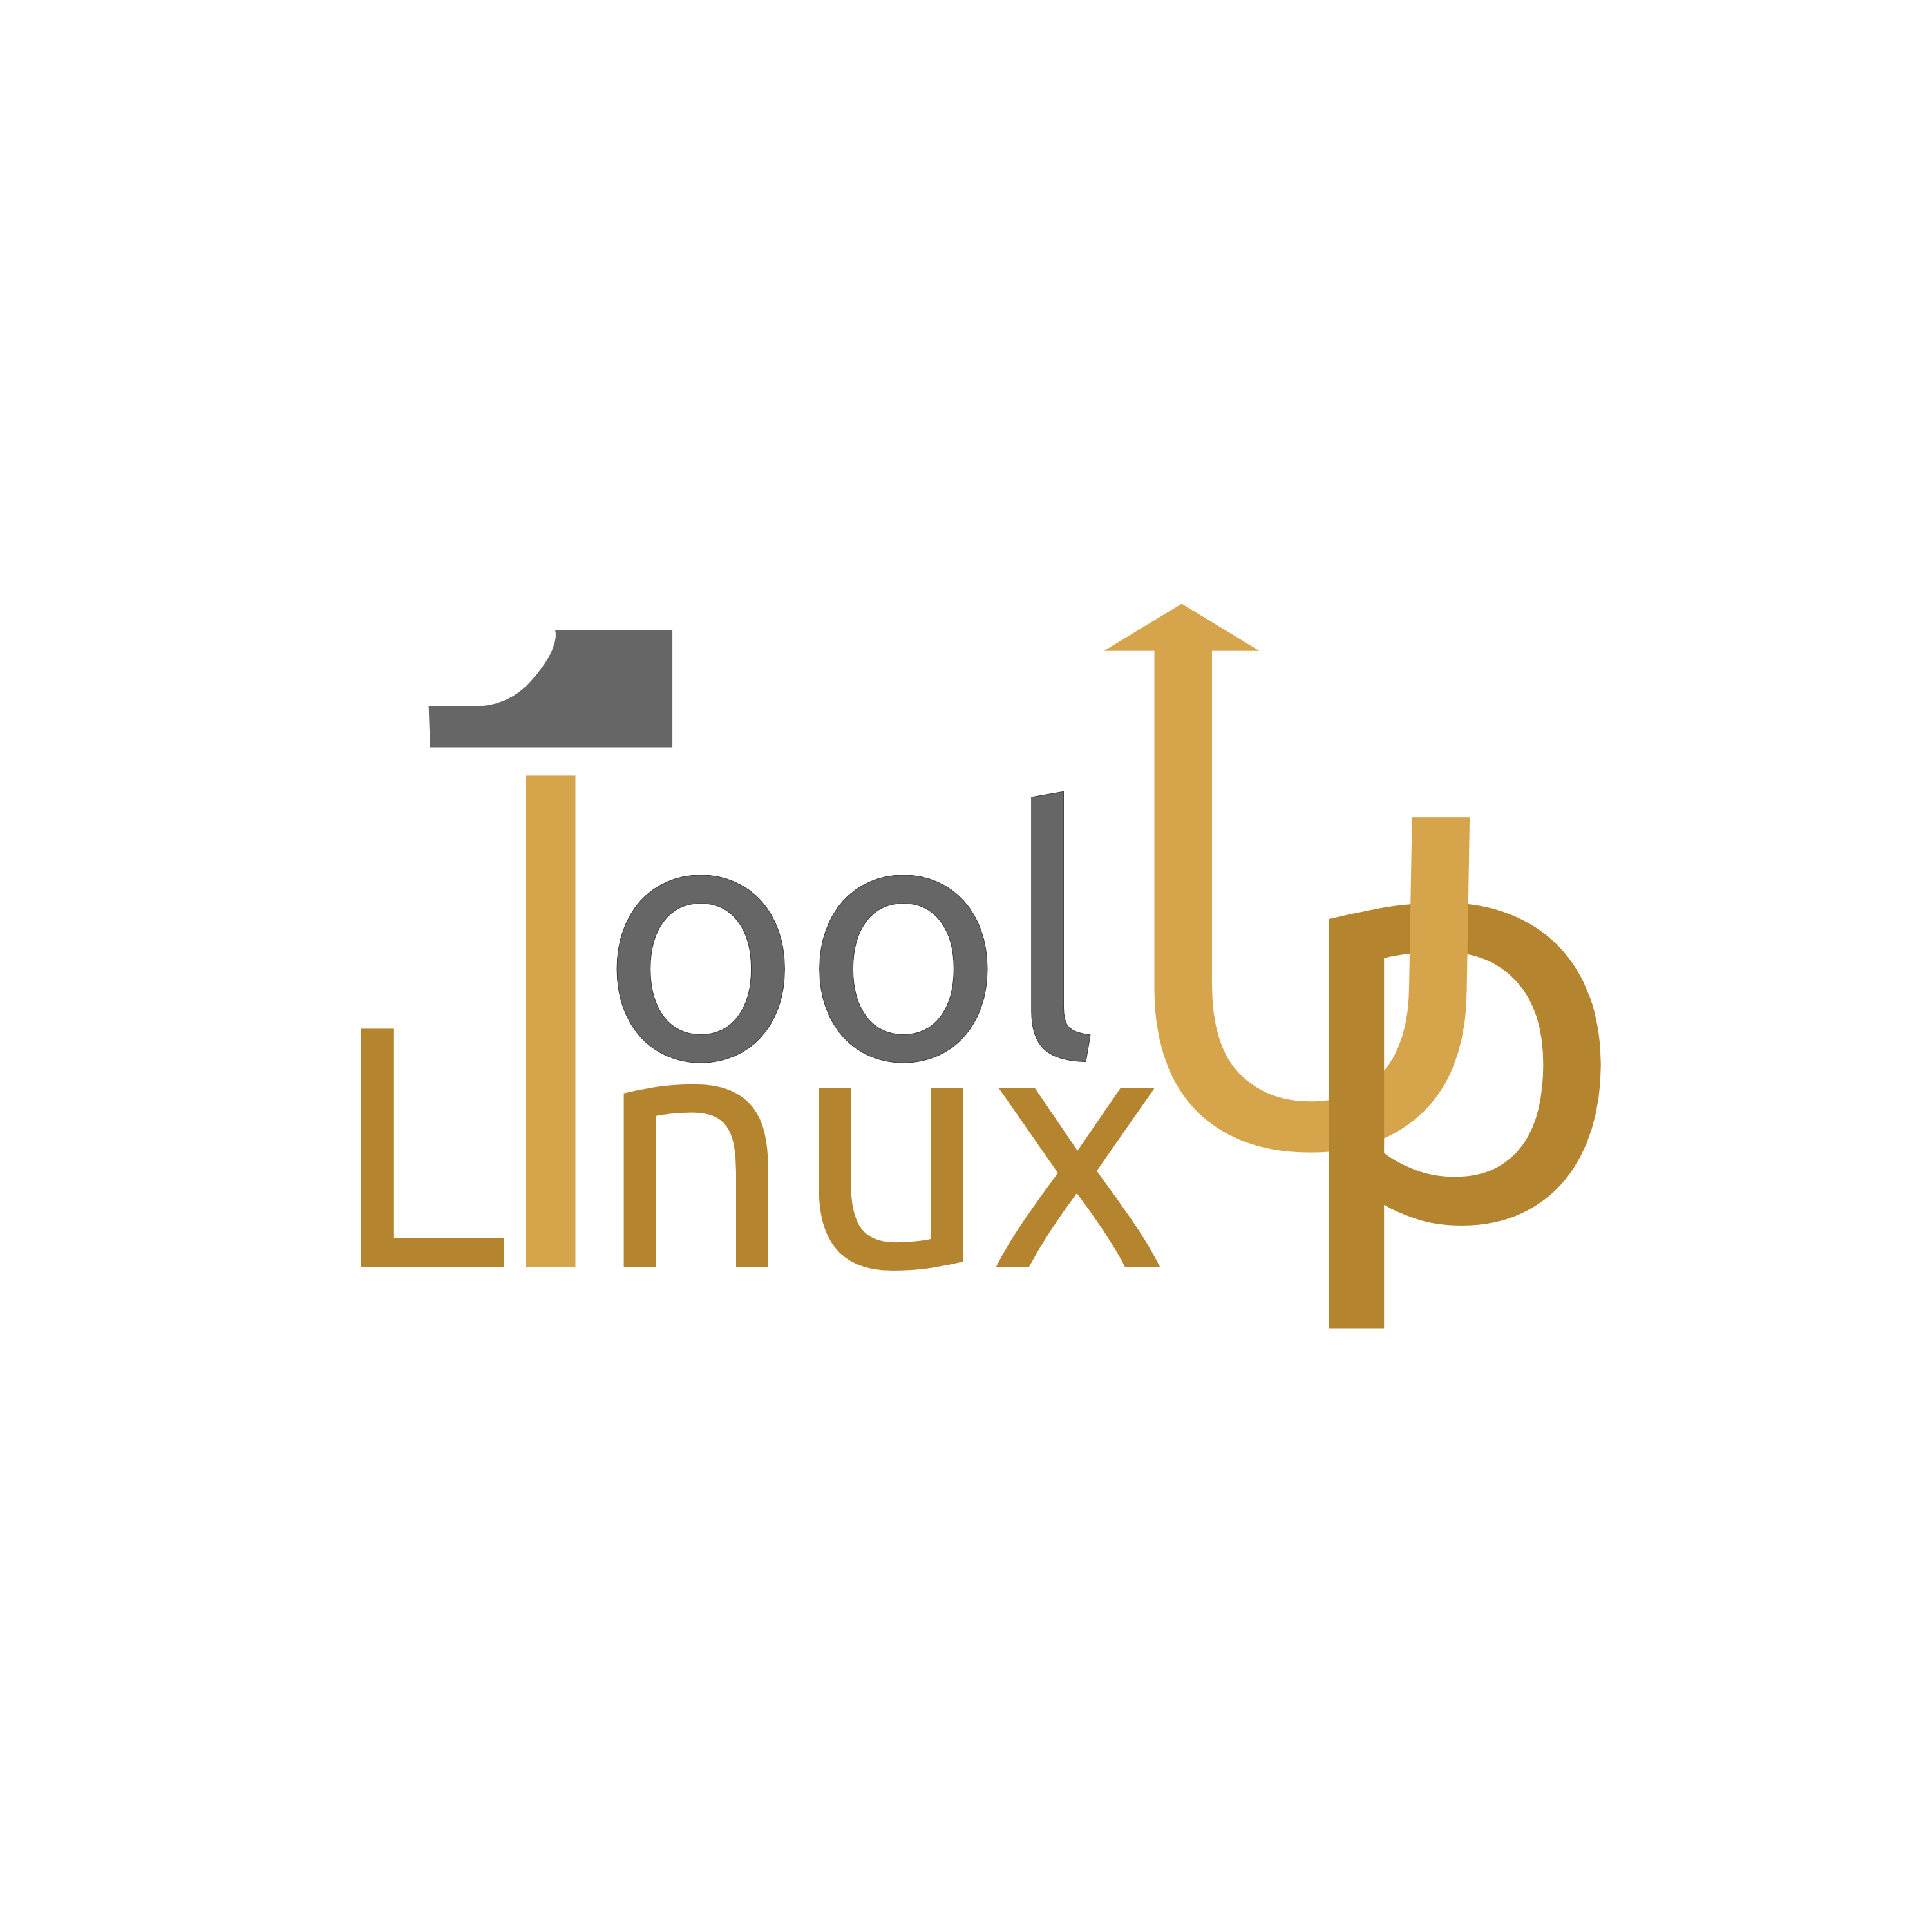 Tool Linux Up